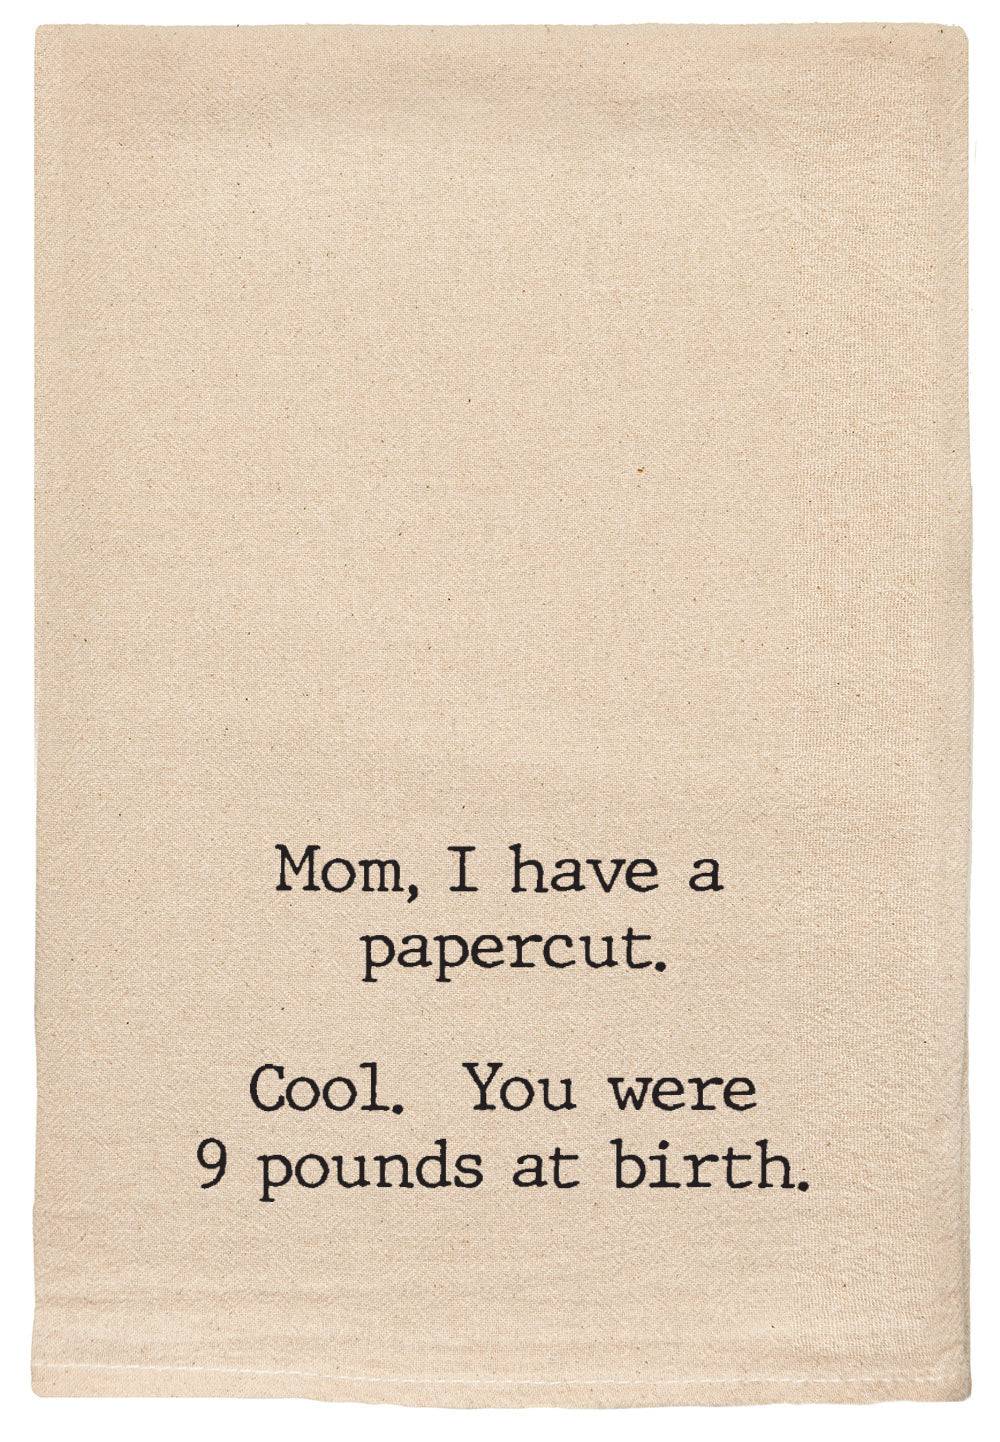 Mom, I have a papercut.  Cool. You were 9 lbs at birth.